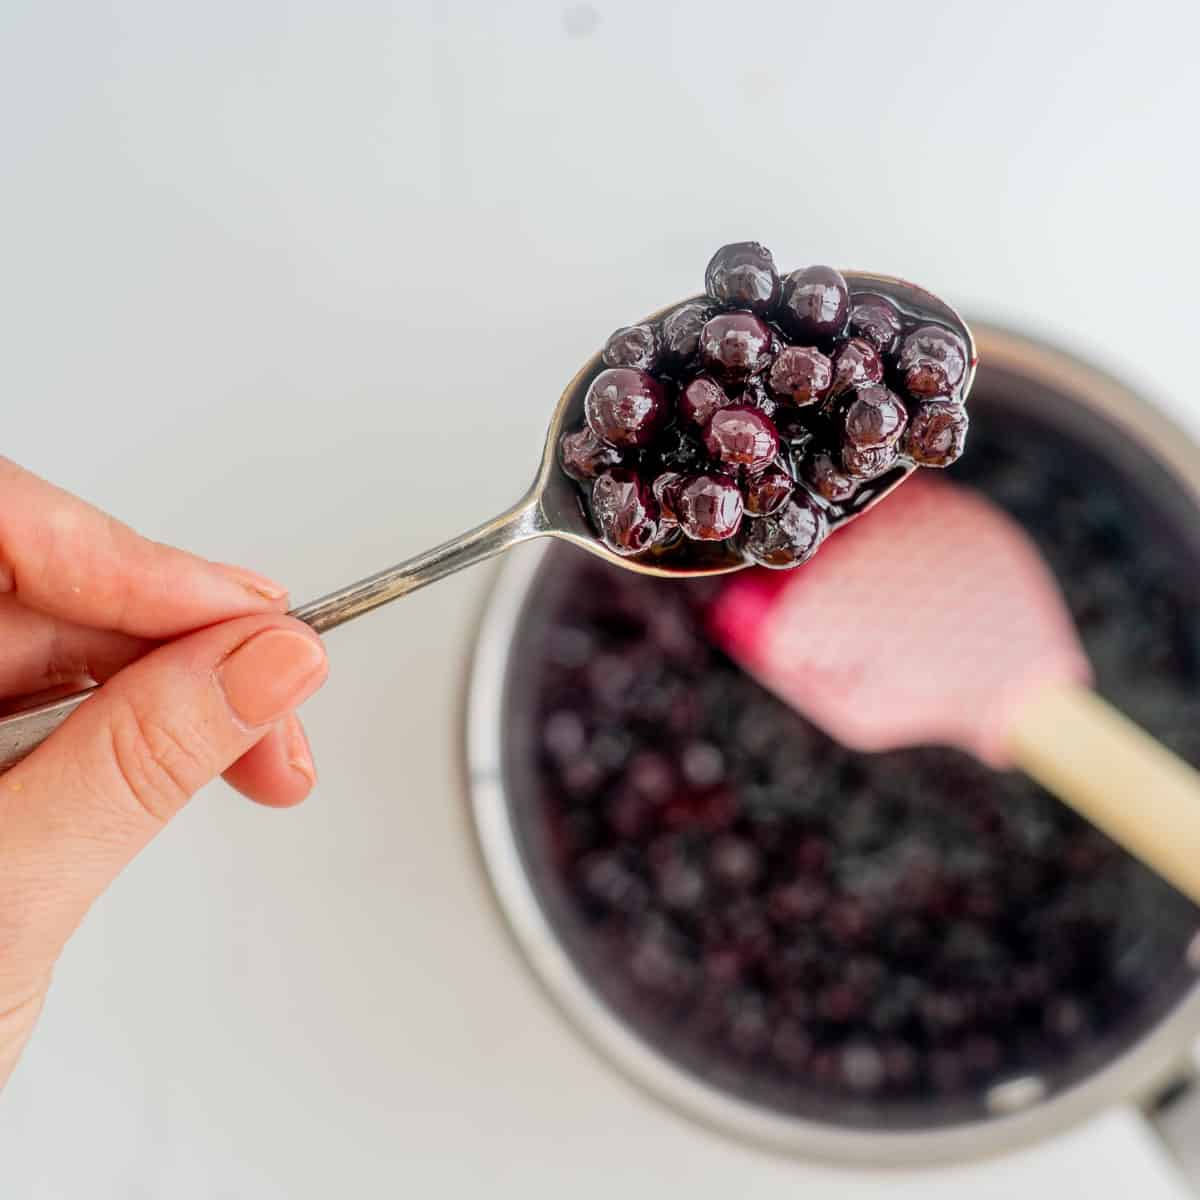 A spoonful of blueberry sauce held above a saucepan of blueberry compote.